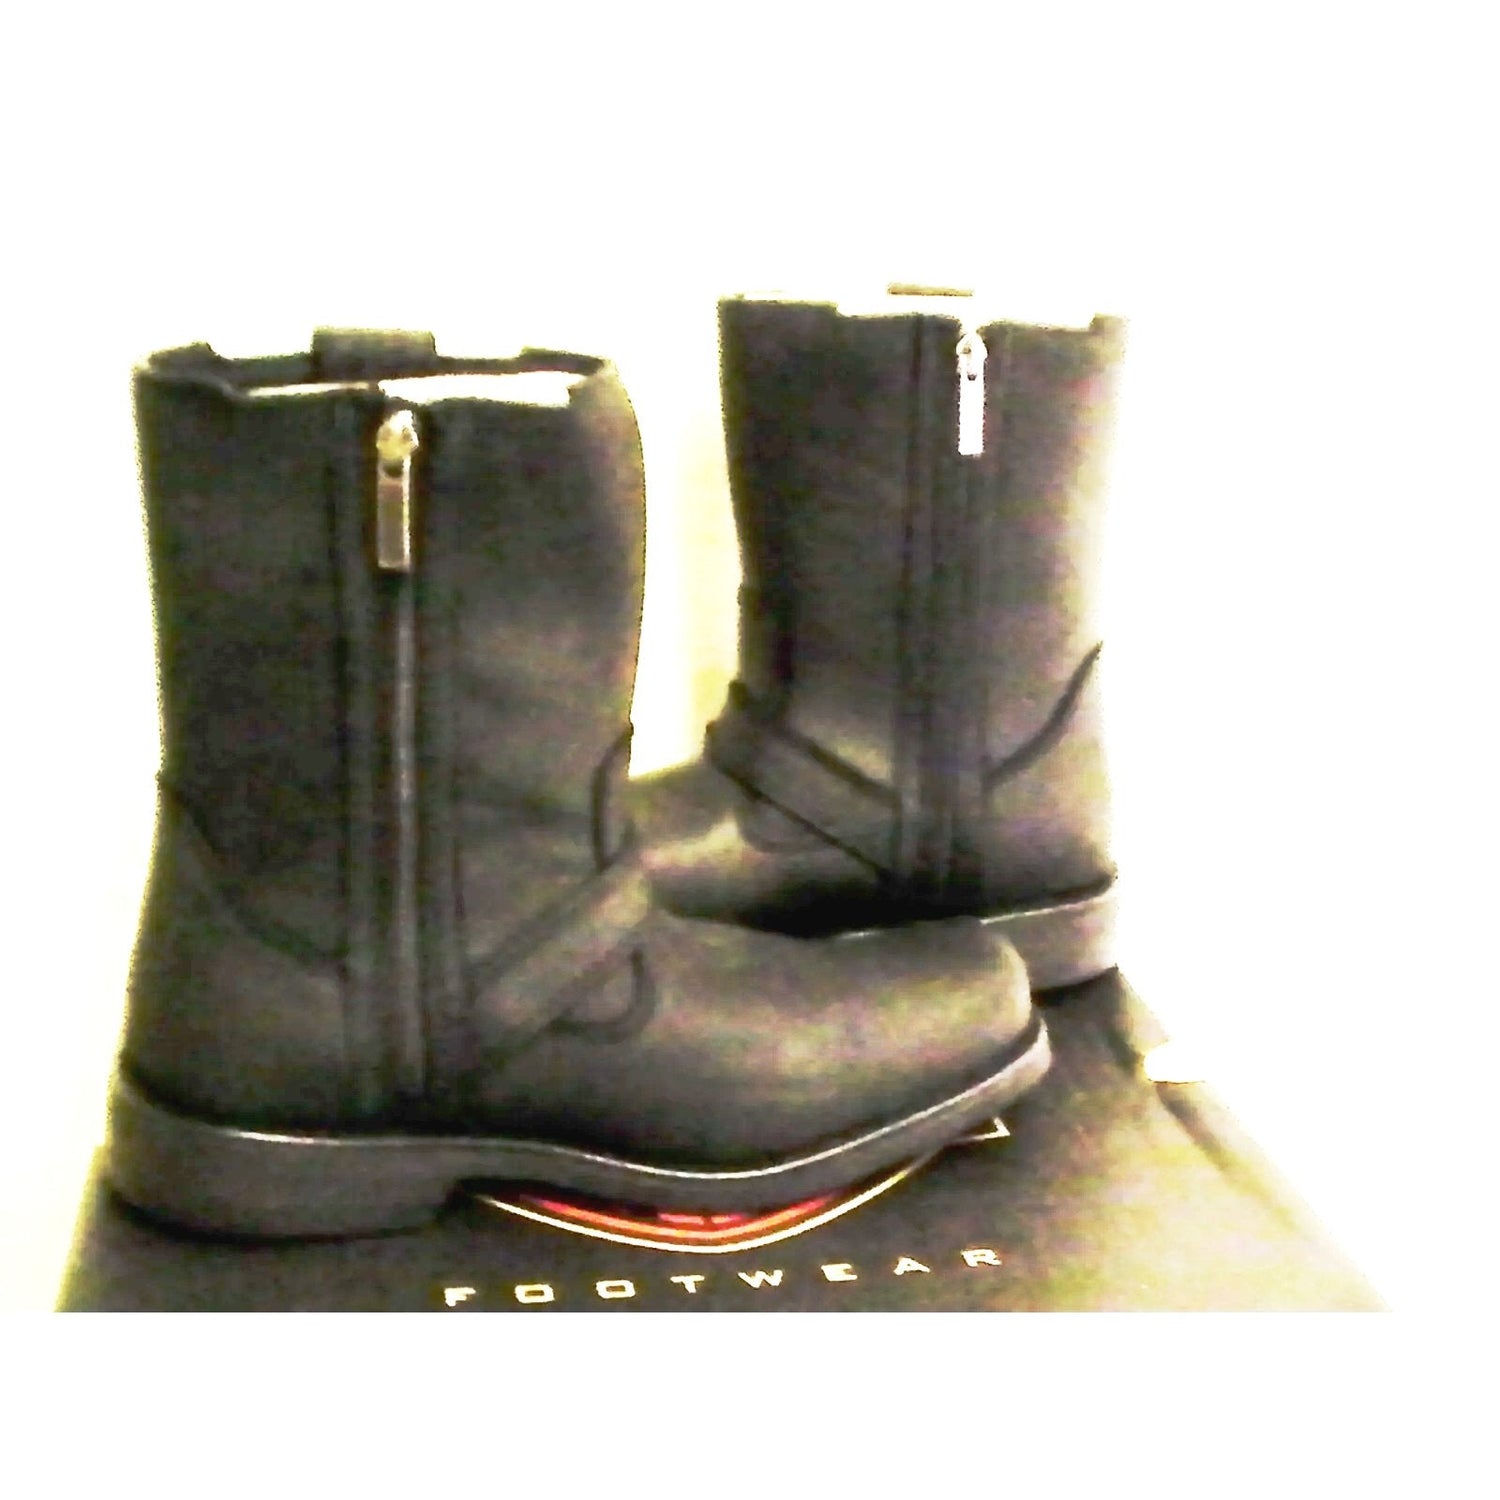 Harley davidson men riding boots troy size 8.5 new with box - Classic Fashion Deals